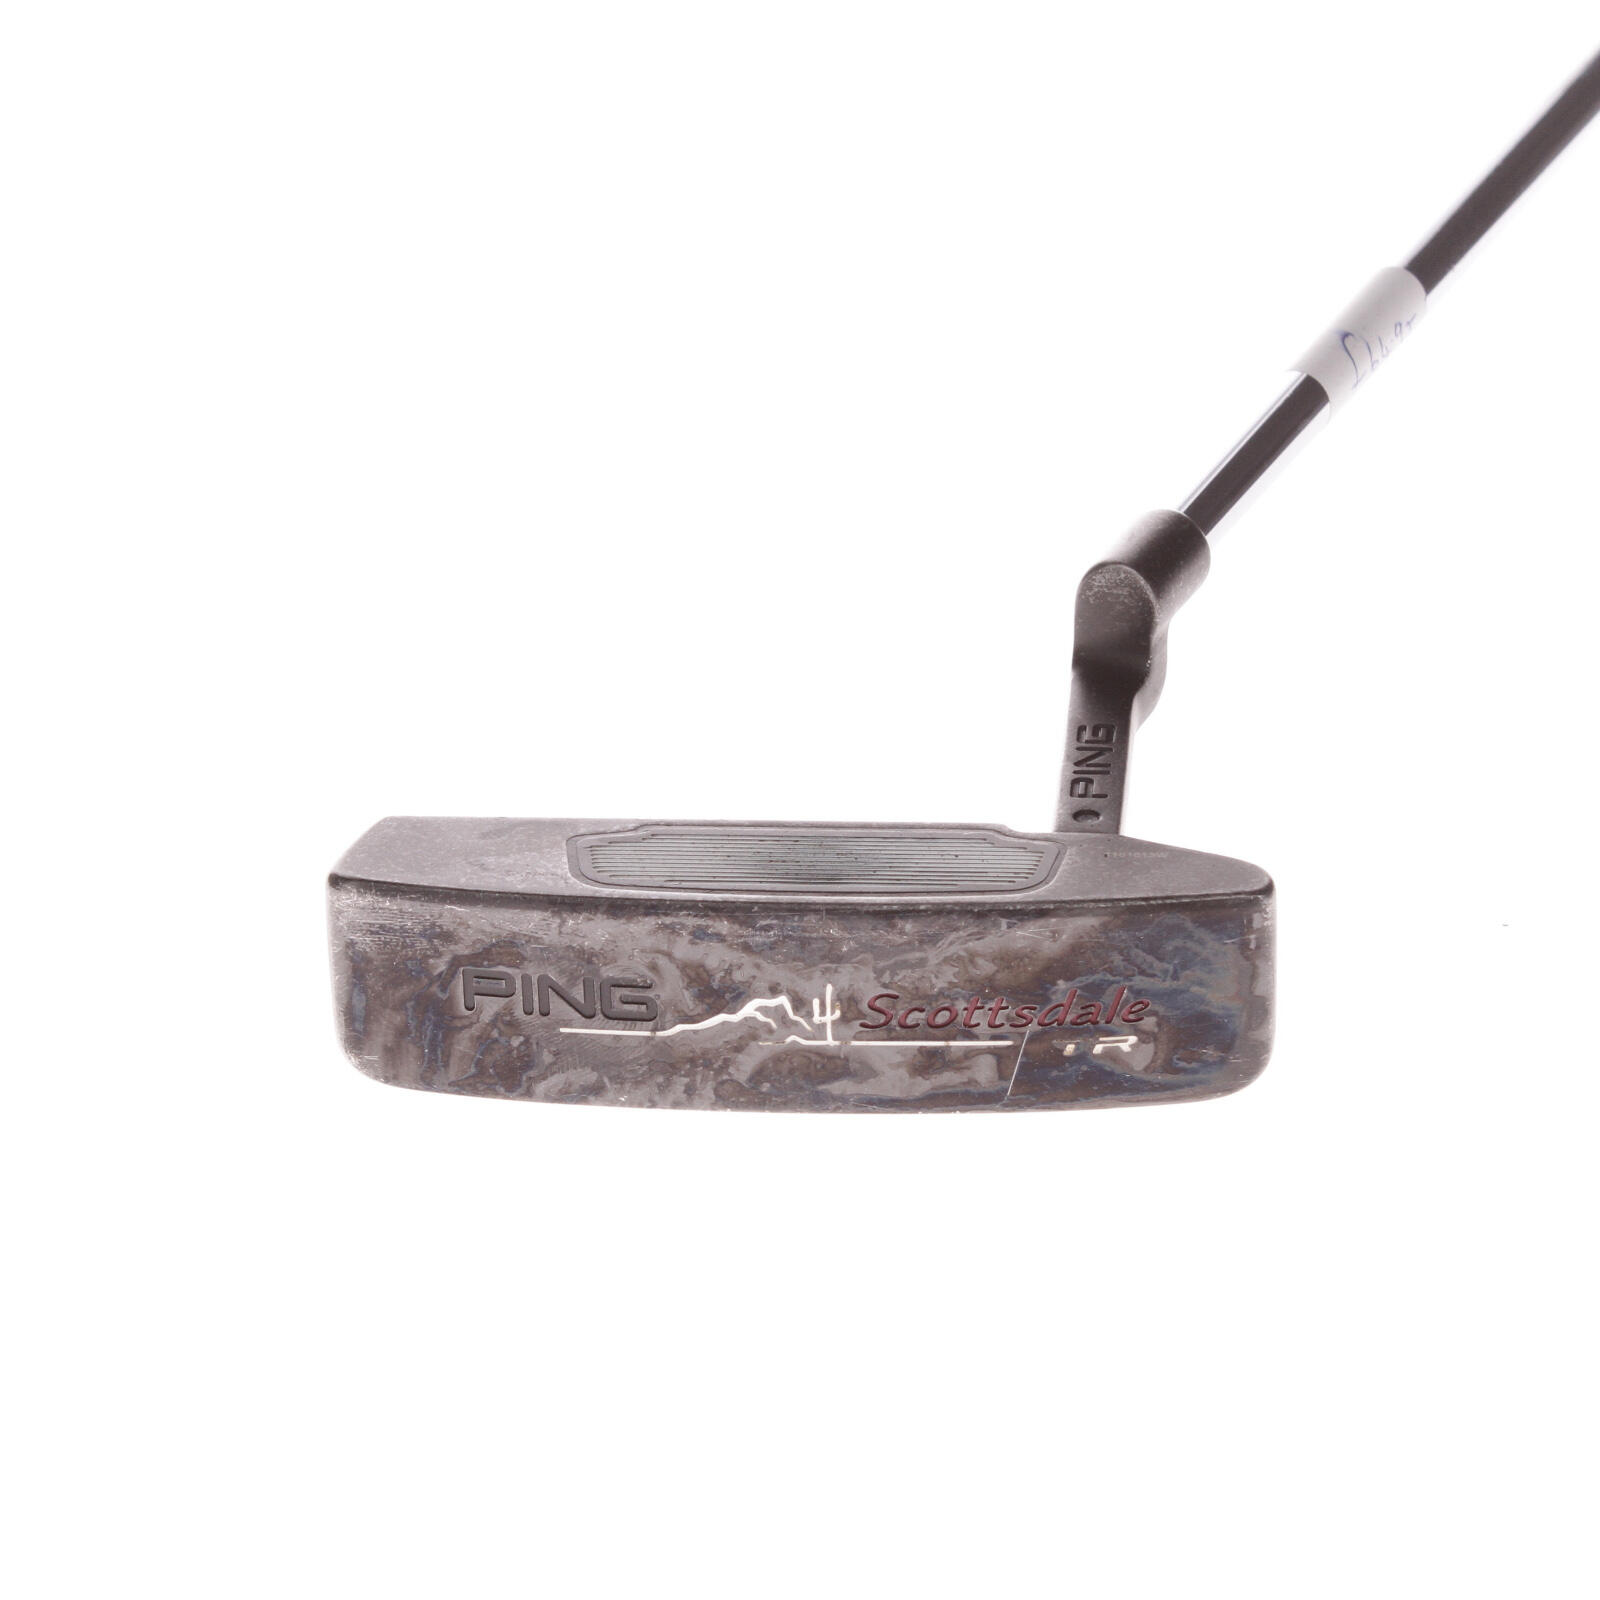 USED - Ping Scottsdale TR Putter 33.5 Inches Steel Shaft Right Handed - GRADE C 1/6